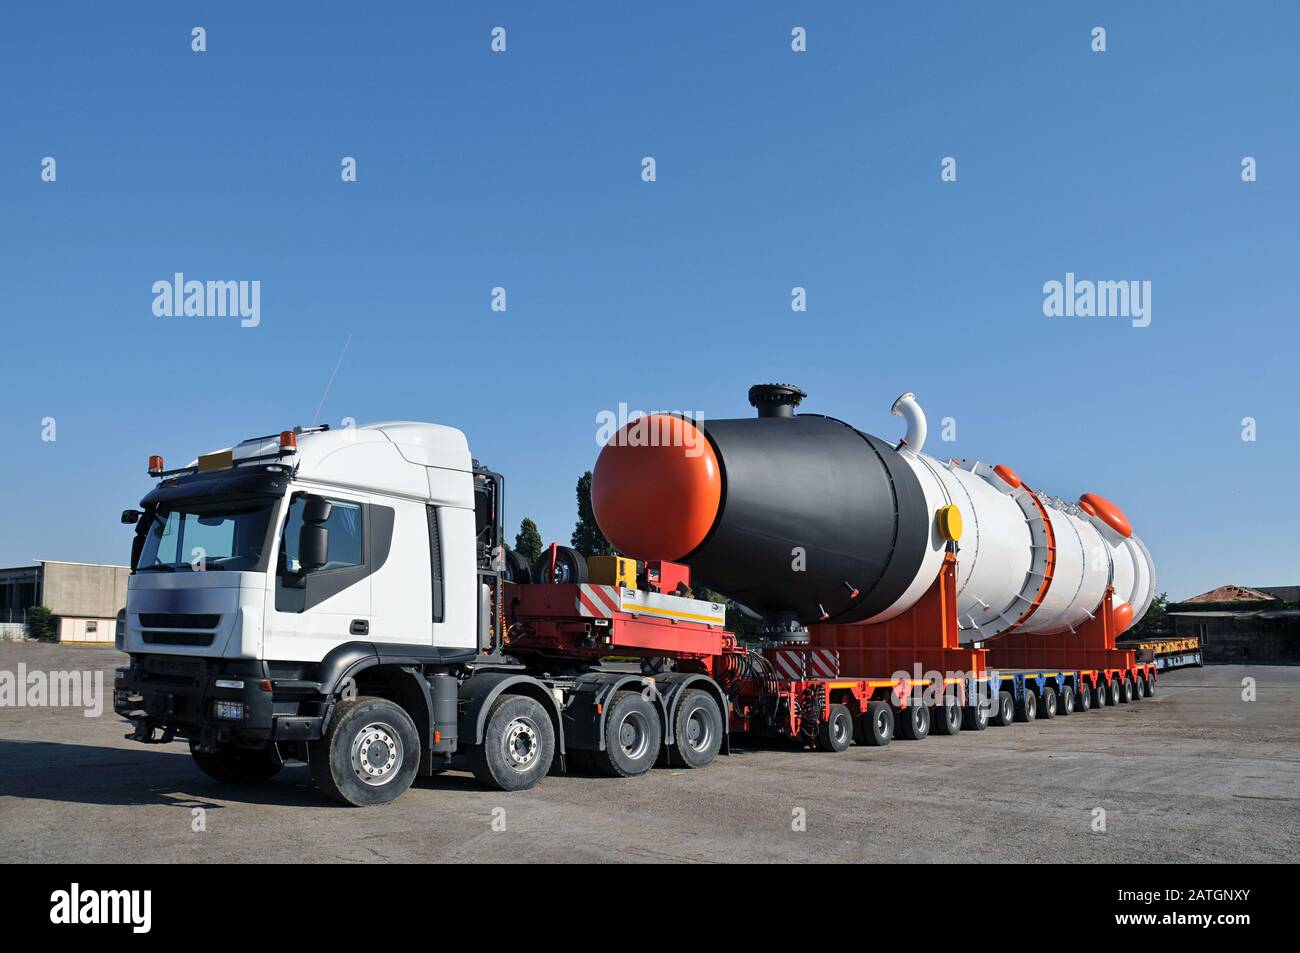 Oversize transport truck with multiple wheels and long storage tank on the tailer parked in a forecourt Stock Photo